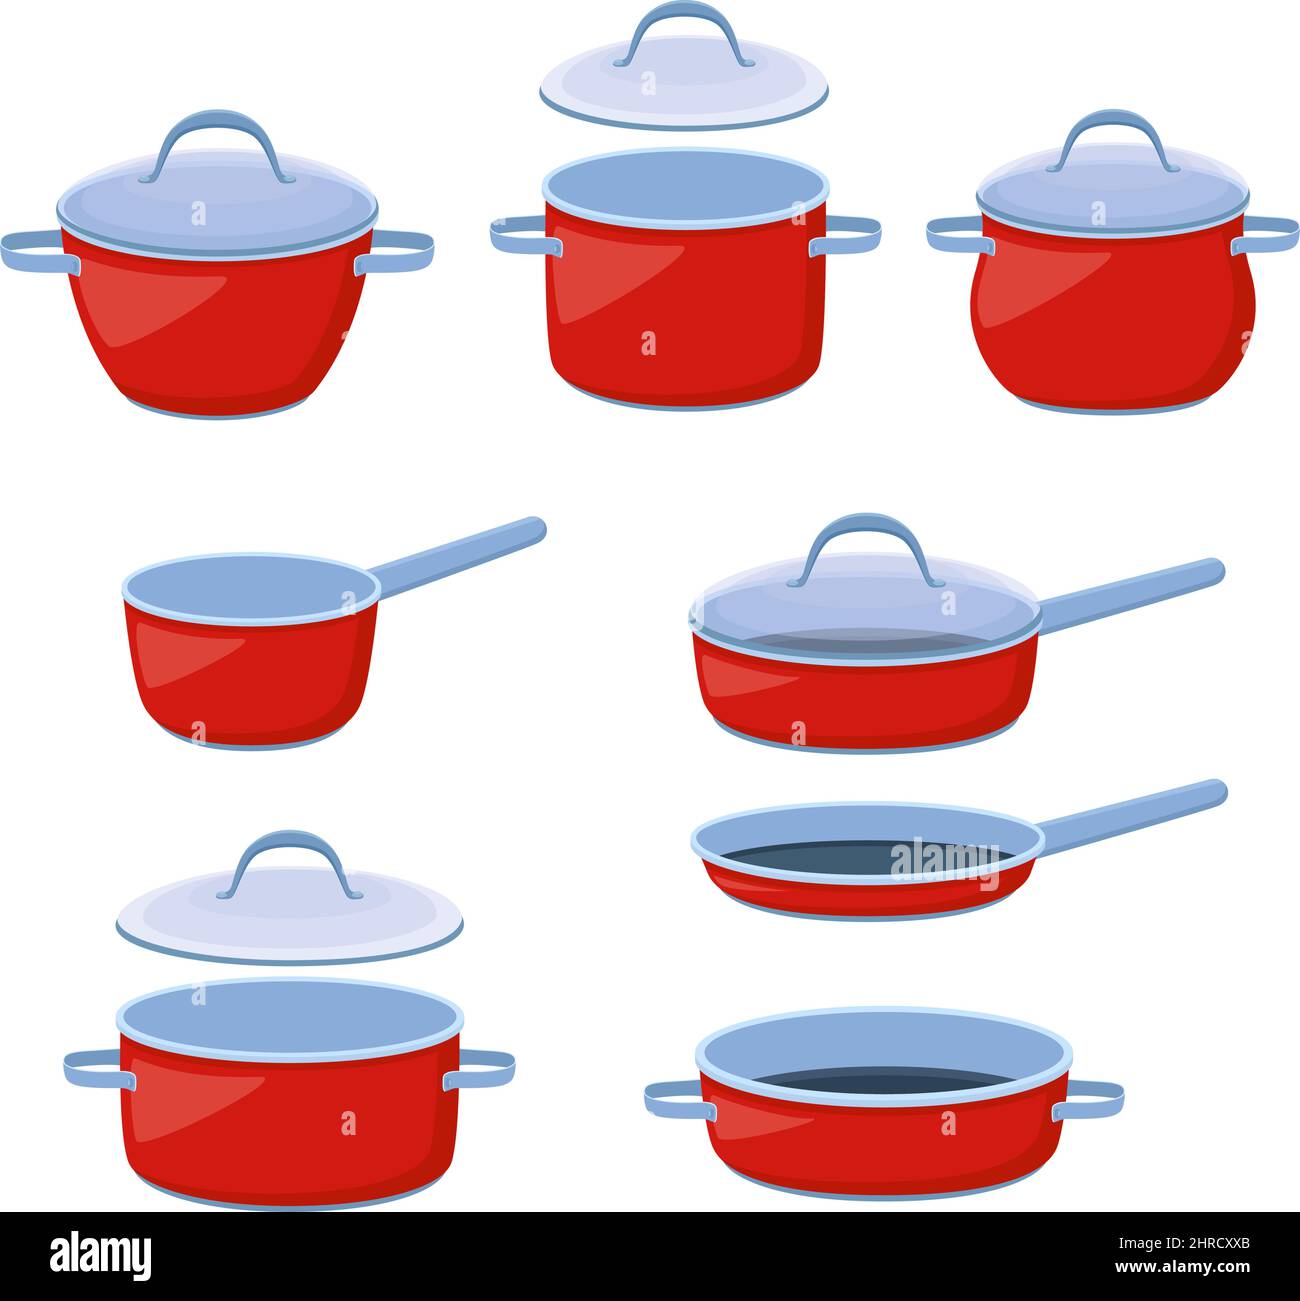 Cooking pots, saucepans and frying pans. Set of kitchen utensils for boiling and frying, vector illustration Stock Vector